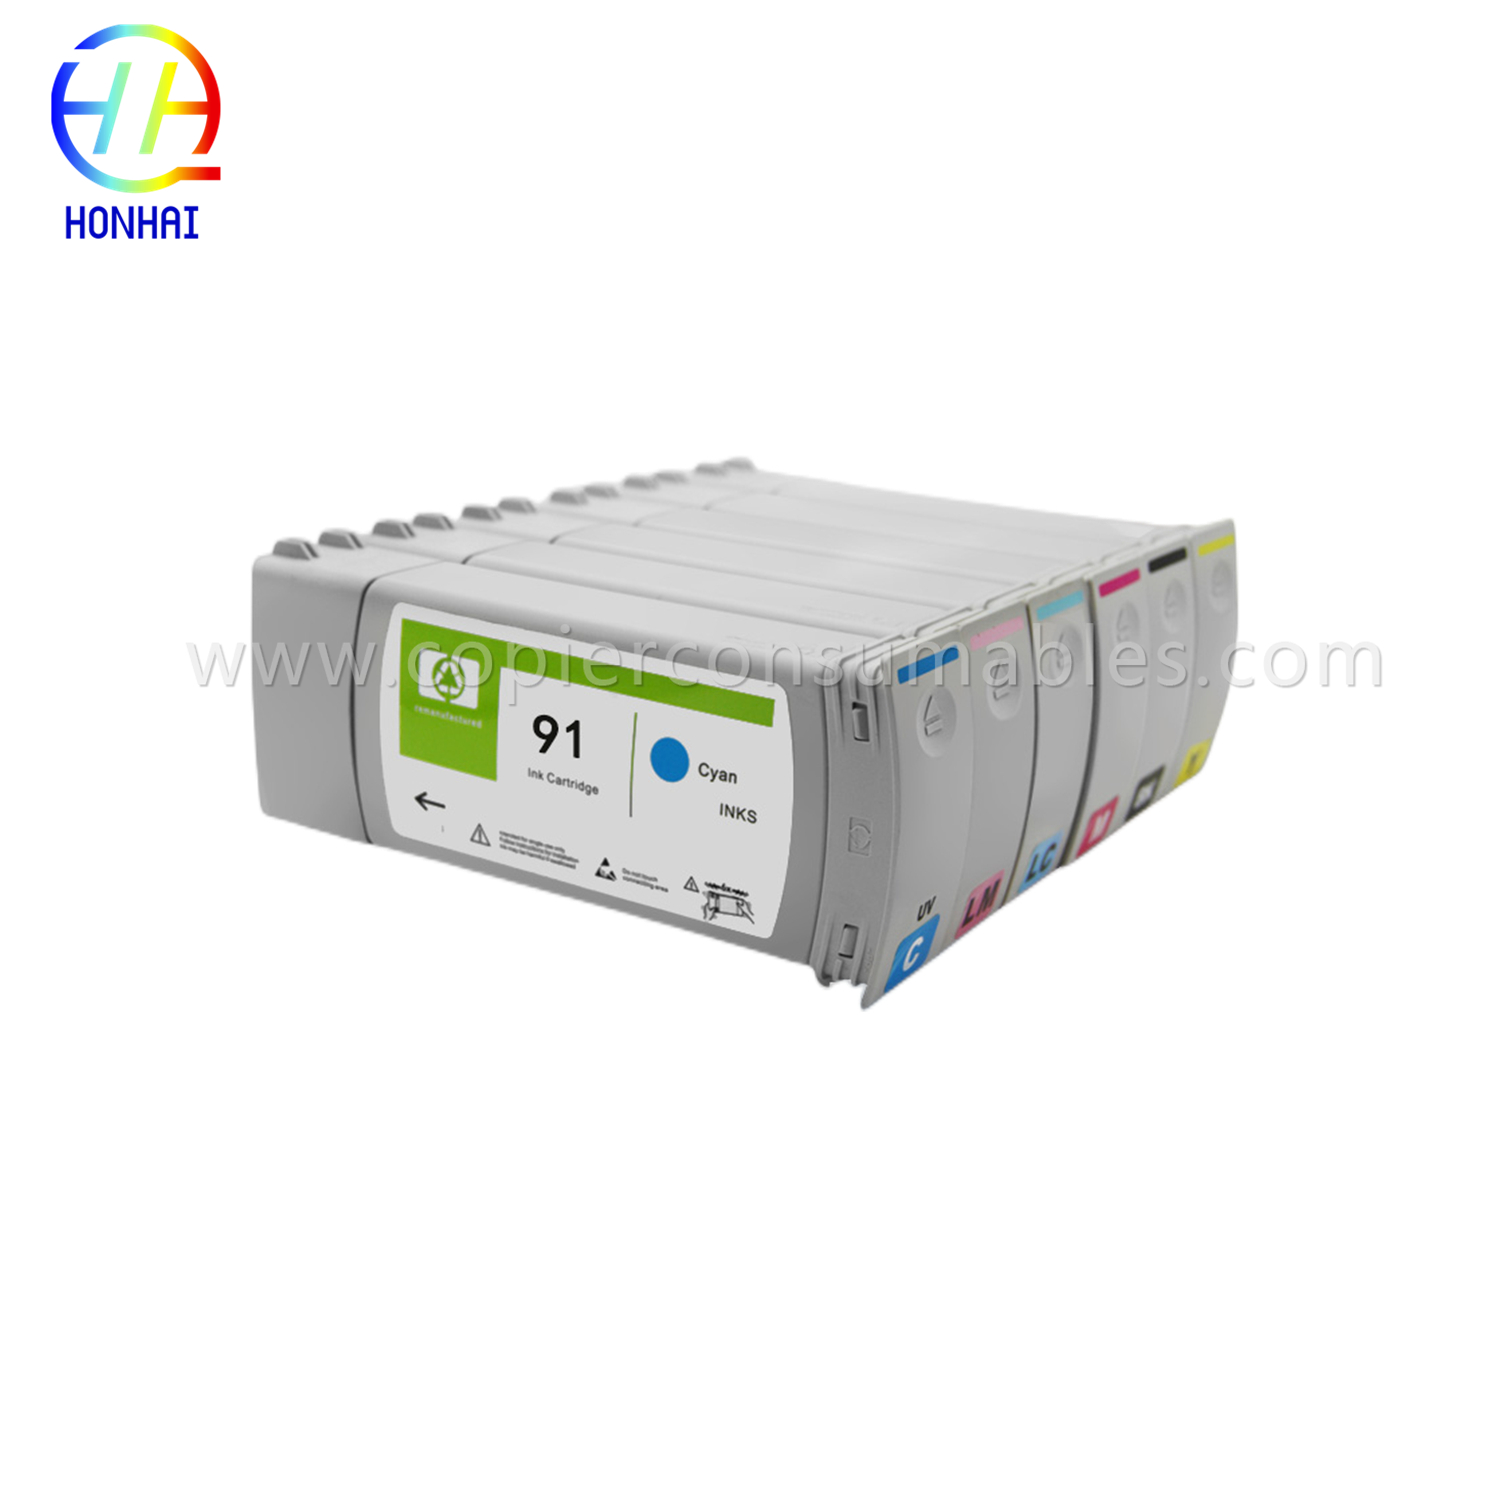 New Genuine Ink Cartridge for HP Designjet Z6100 91 C9464A C9469A C9471 C9518